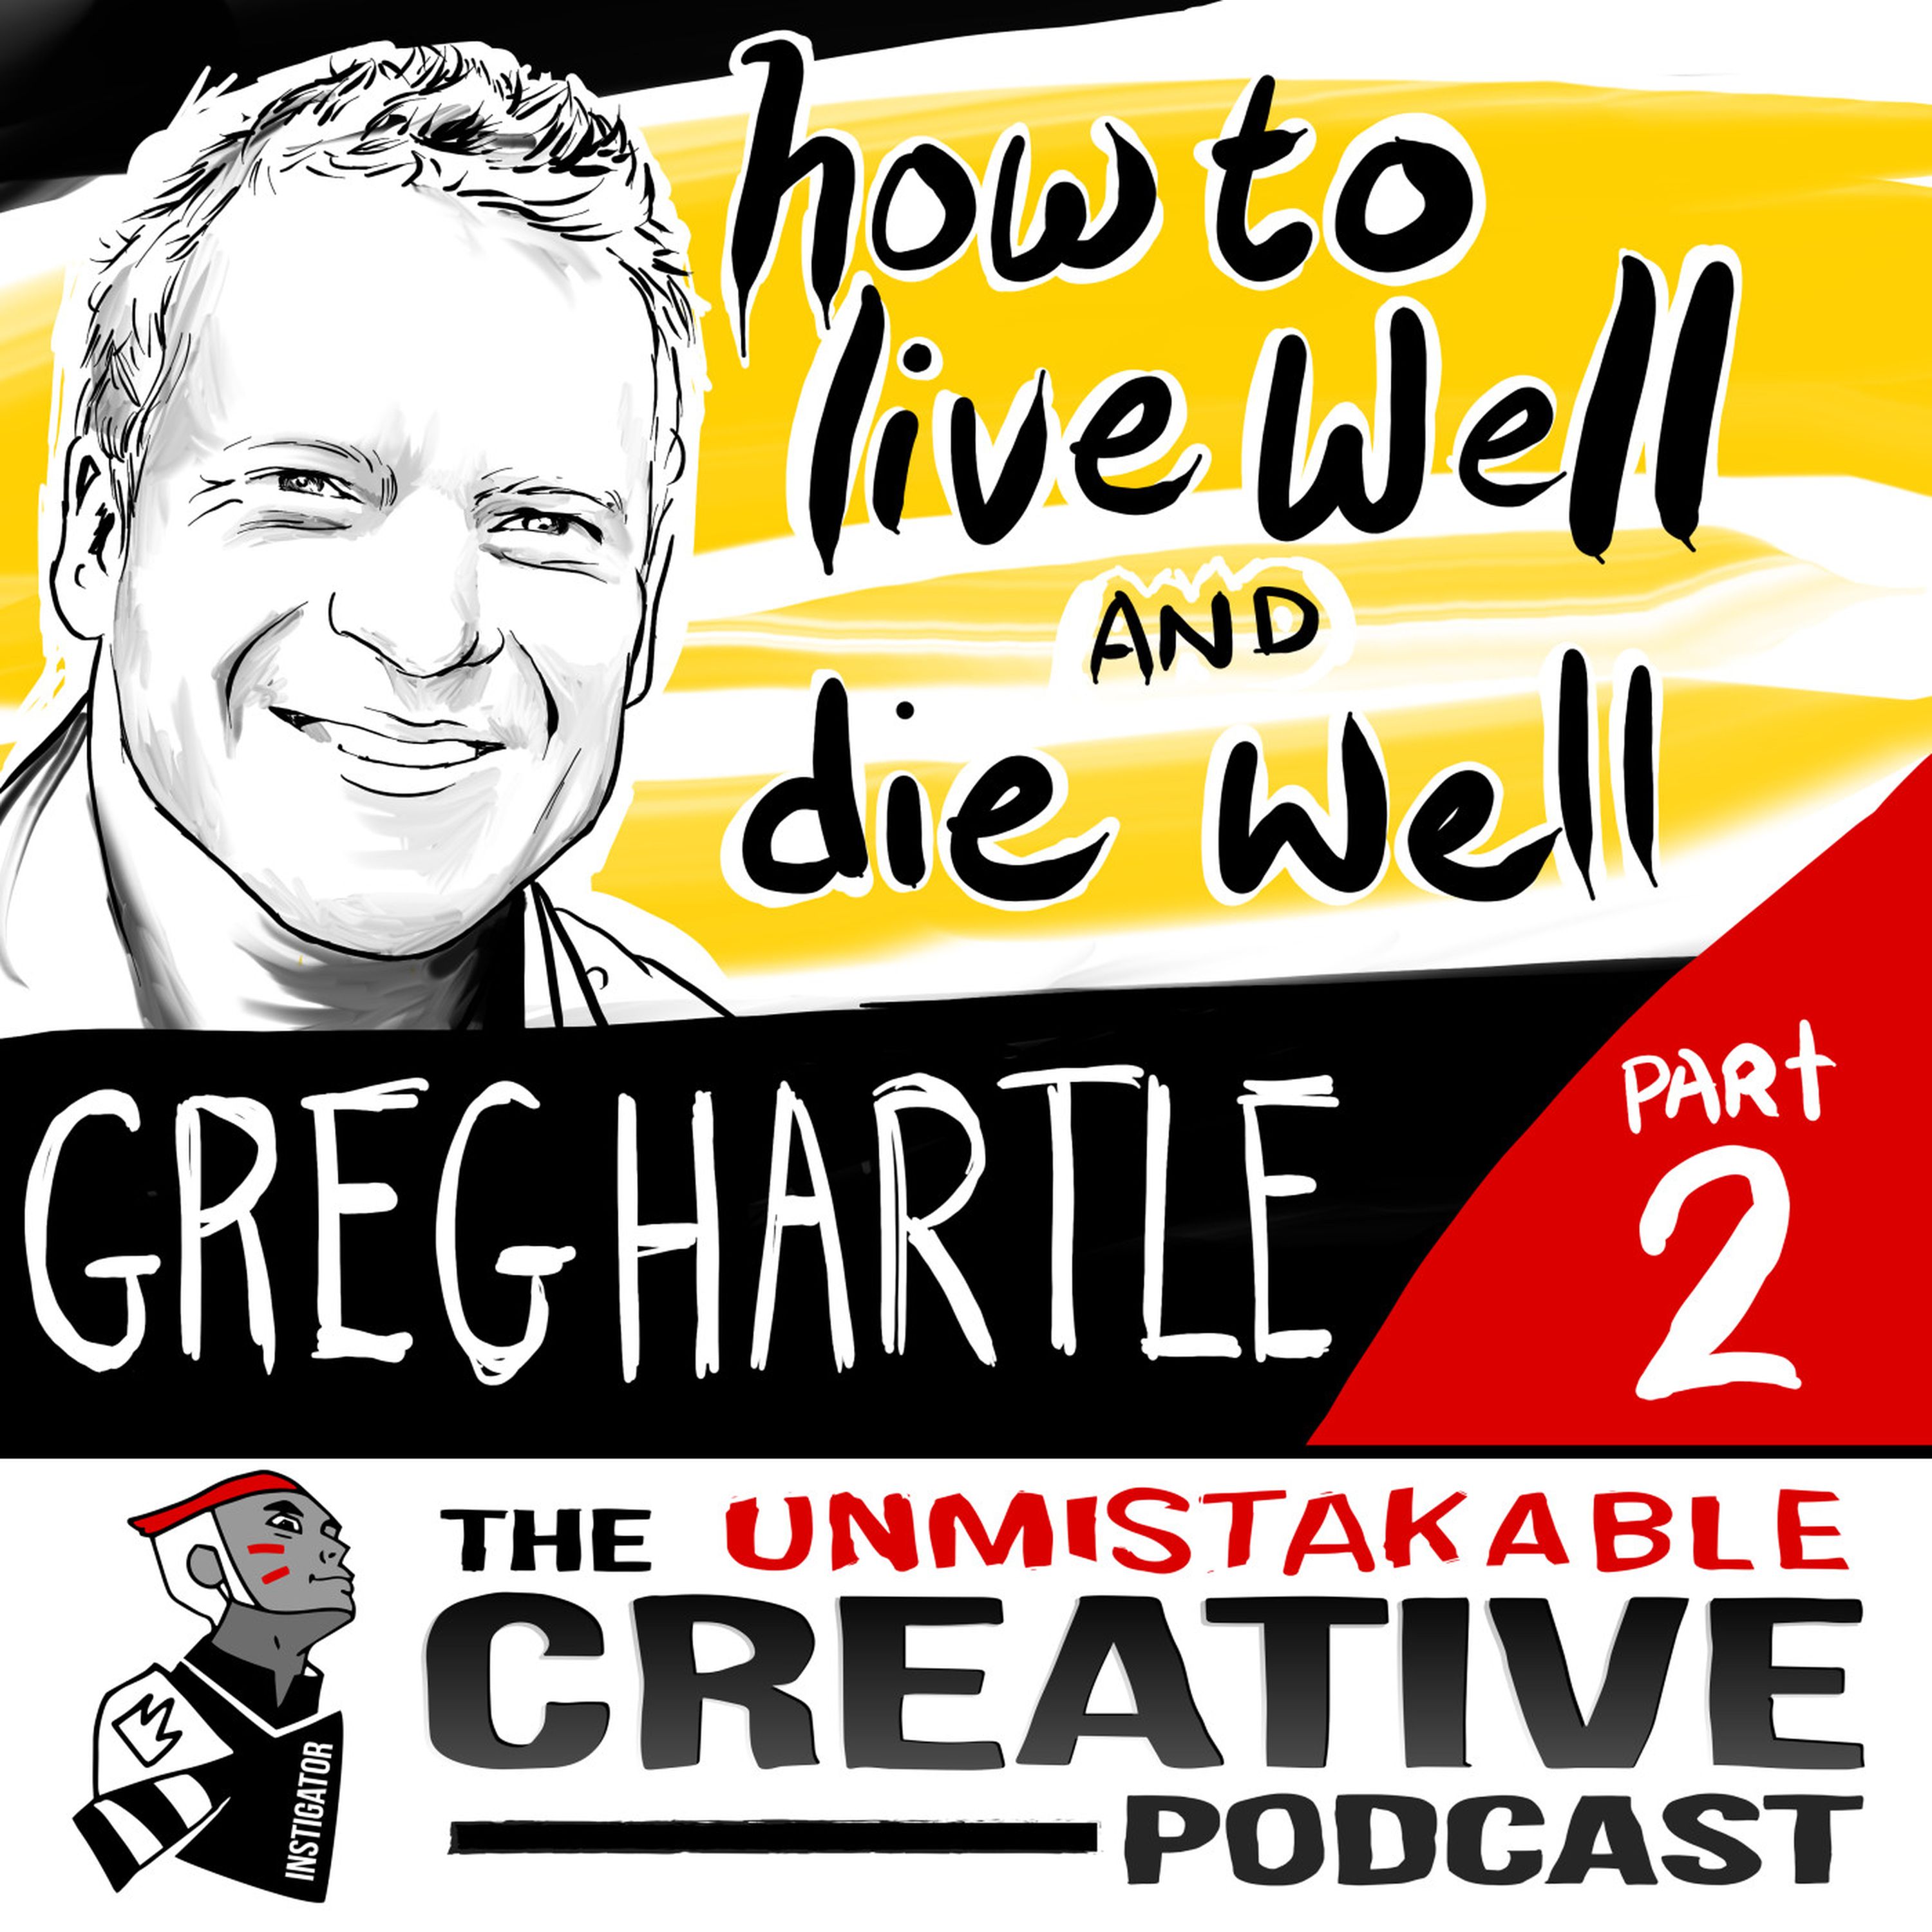 Unmistakable Classics: Greg Hartle | How to Live Well and Die Well With Greg Hartle Pt. 2 Image